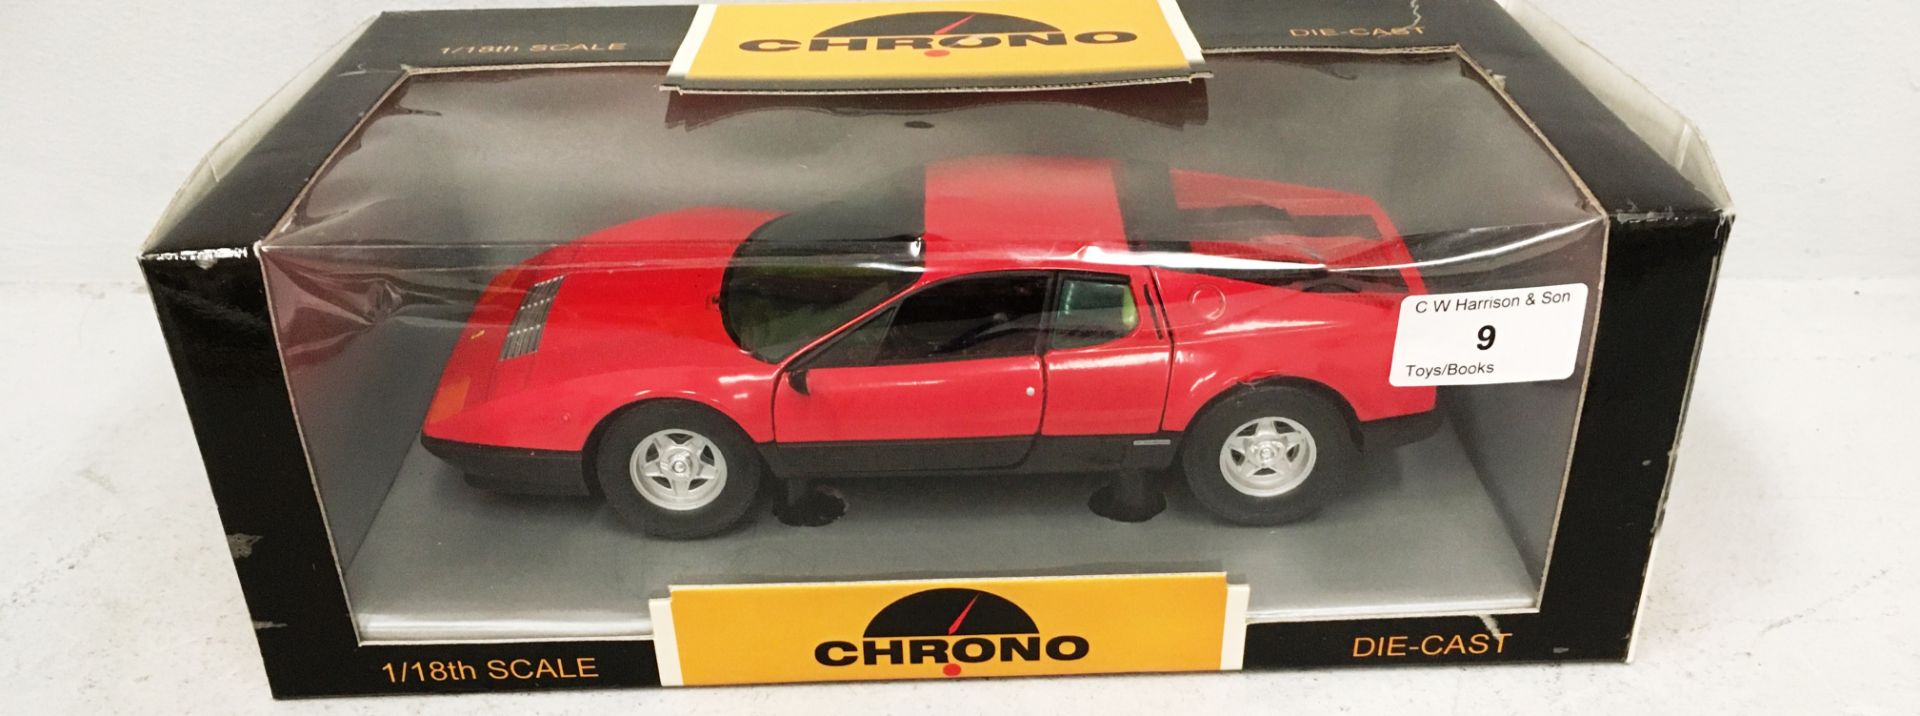 Chrono 1/18 scale die cast metal model of Ferrari (boxed) Further Information